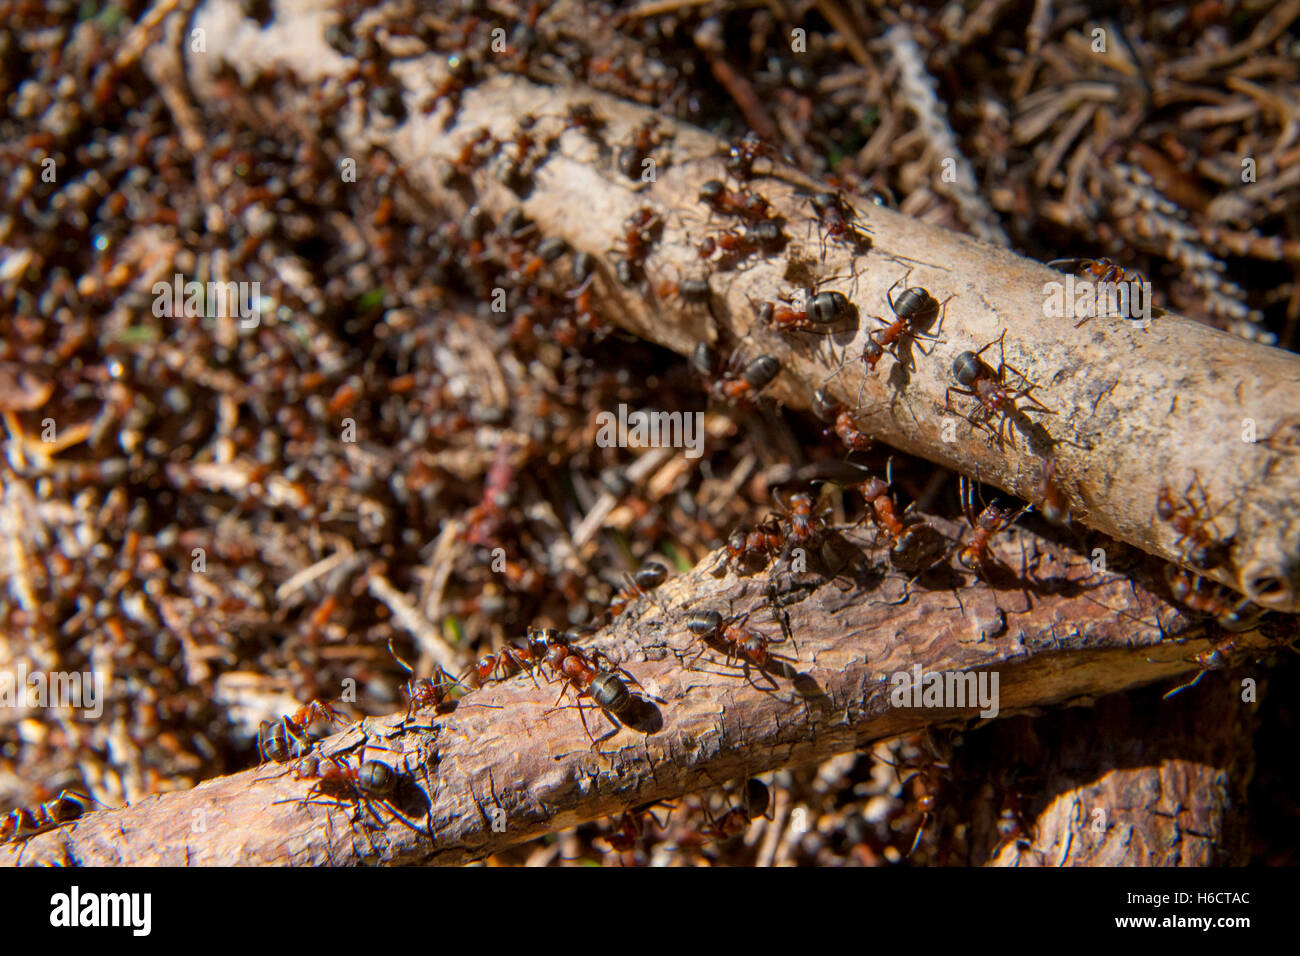 Southern wood ant or horse ant (Formica rufa) on an anthill, Bavaria Stock Photo